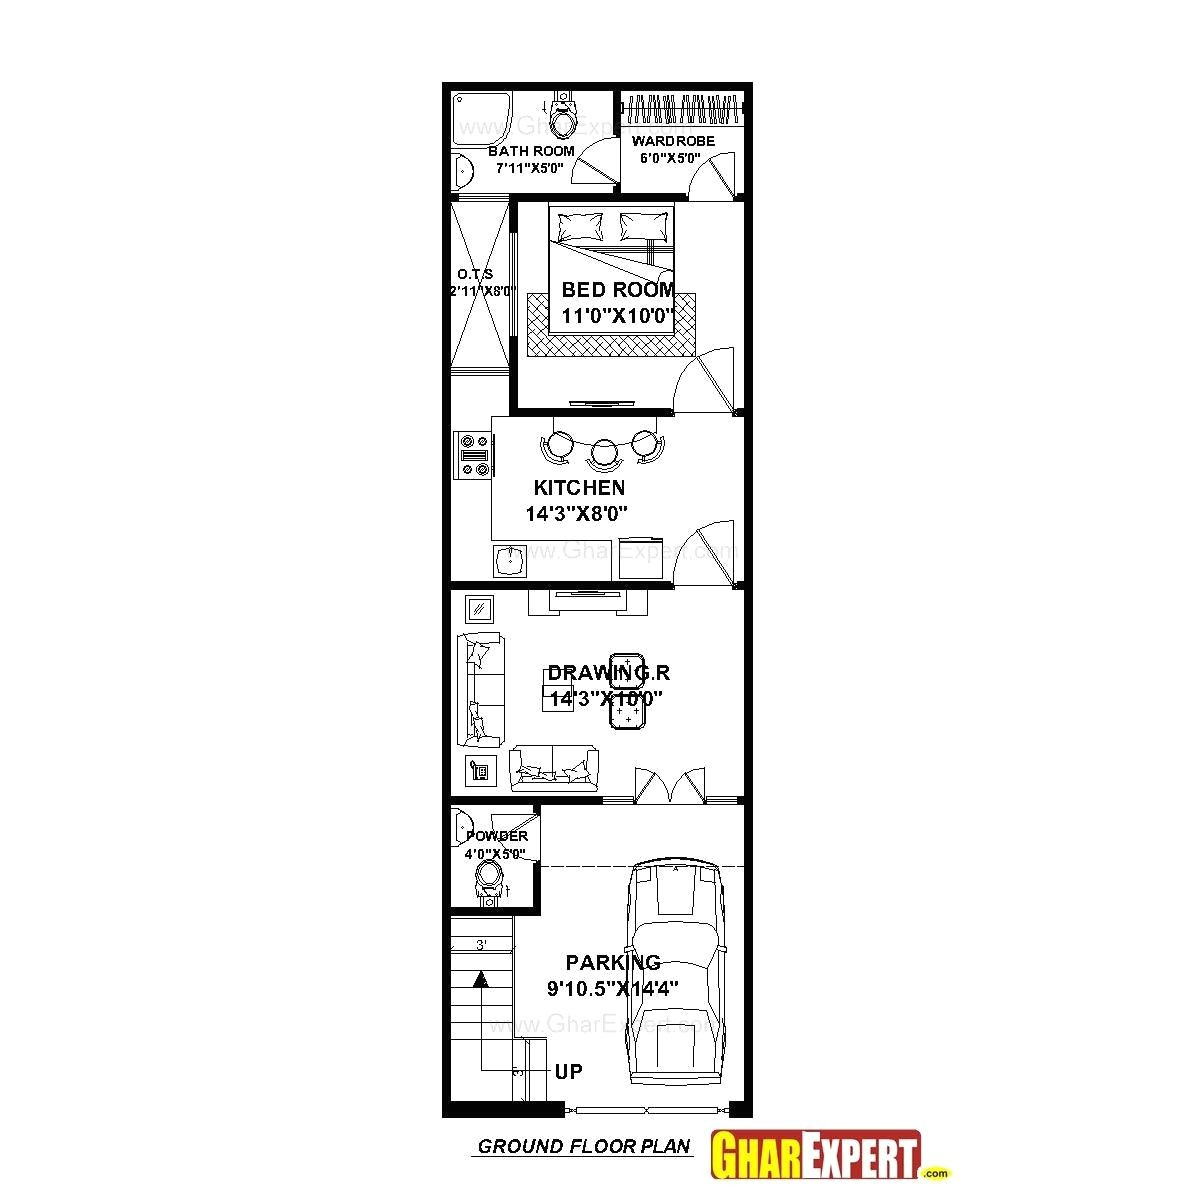 W Drawing Picture Drawing Plan for House Fresh How to Draw Sliding Doors In Floor Plan